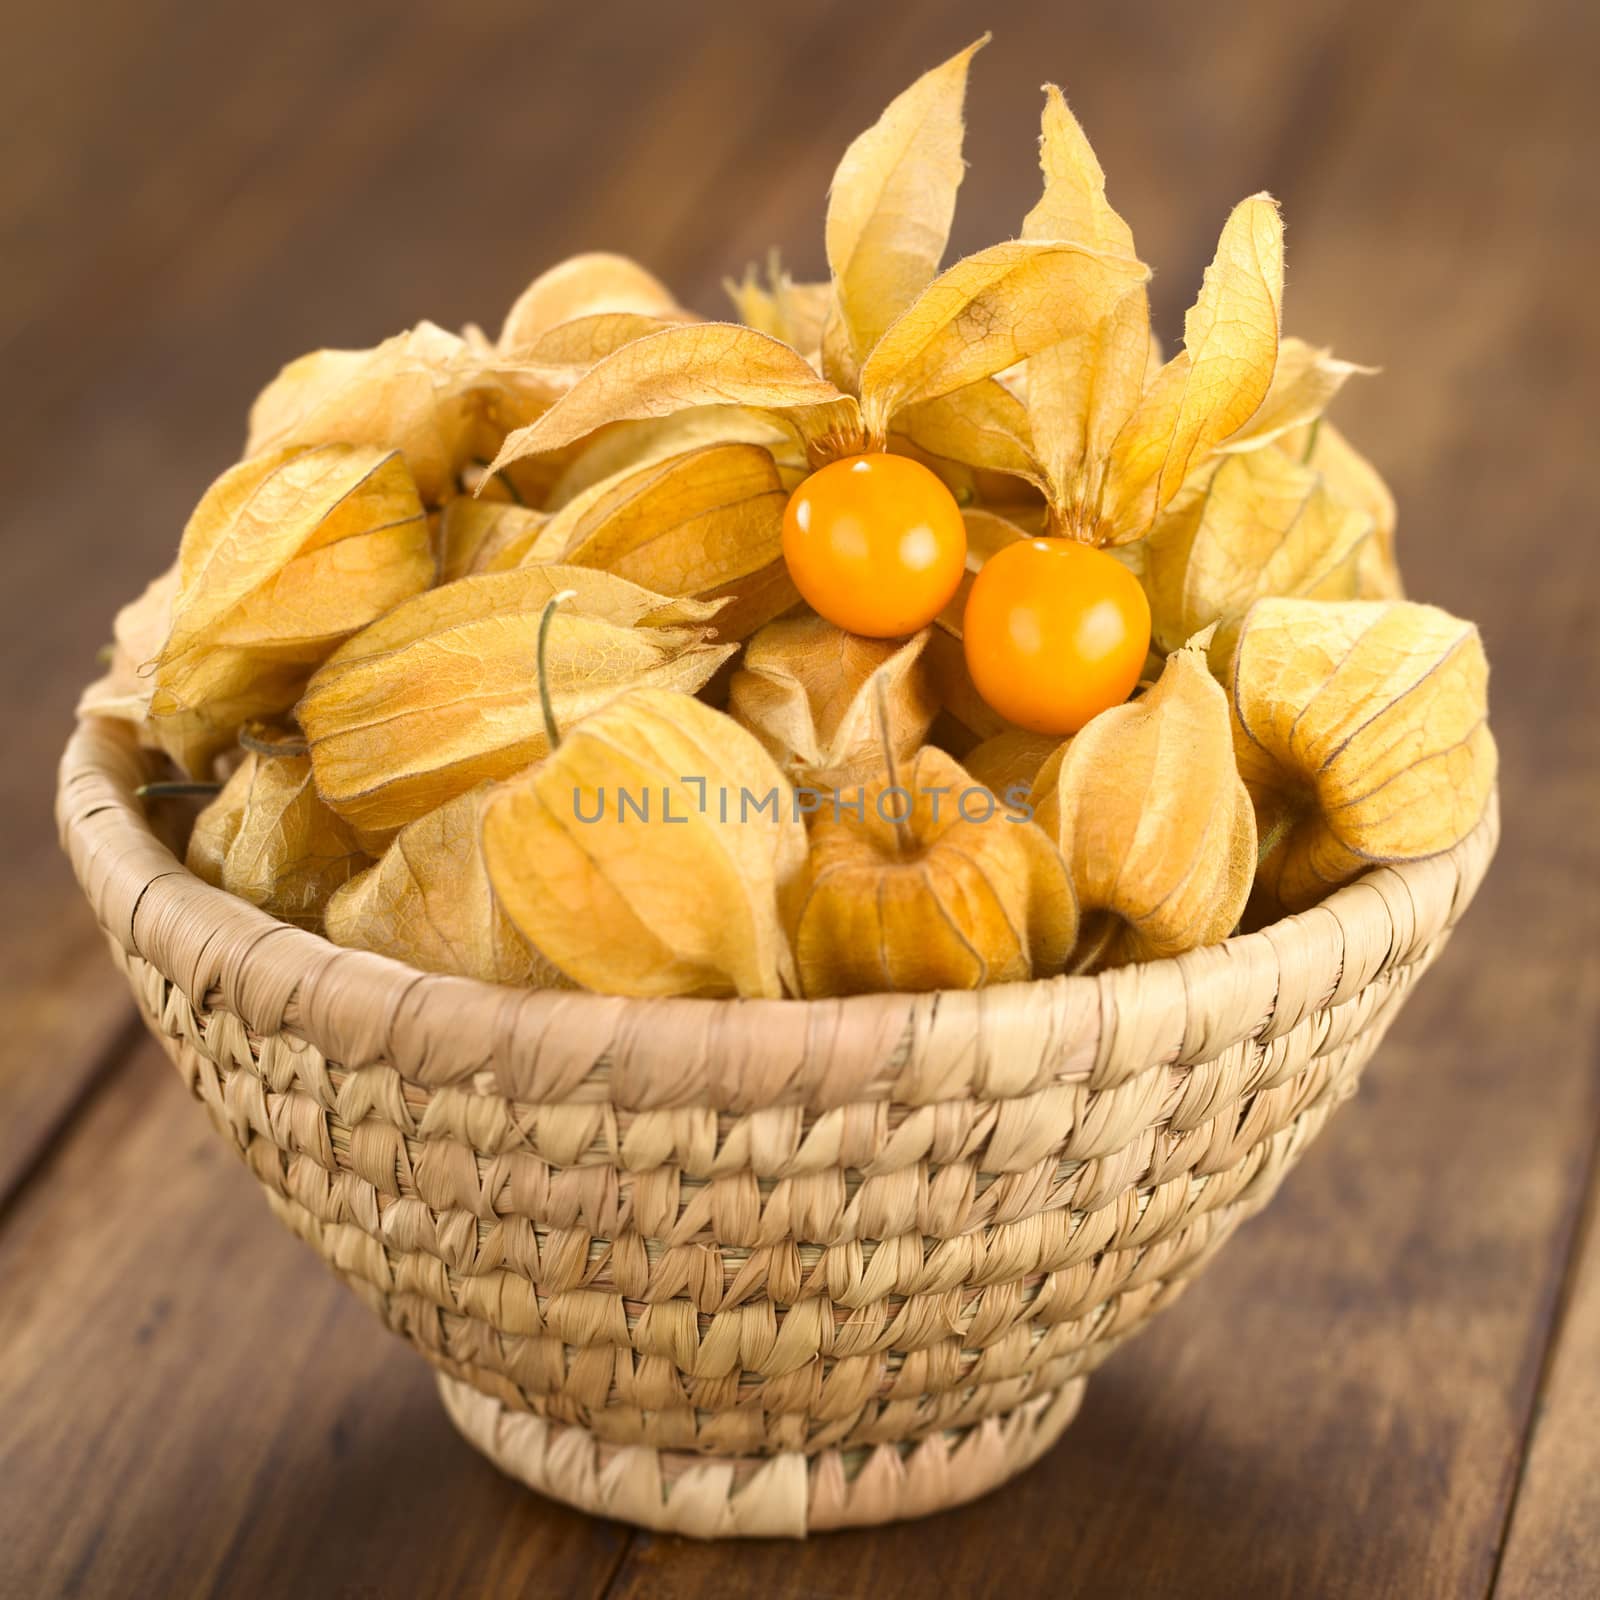 Physalis berry fruits (lat. Physalis peruviana) with husk in basket (Selective Focus, Focus on the open physalis)